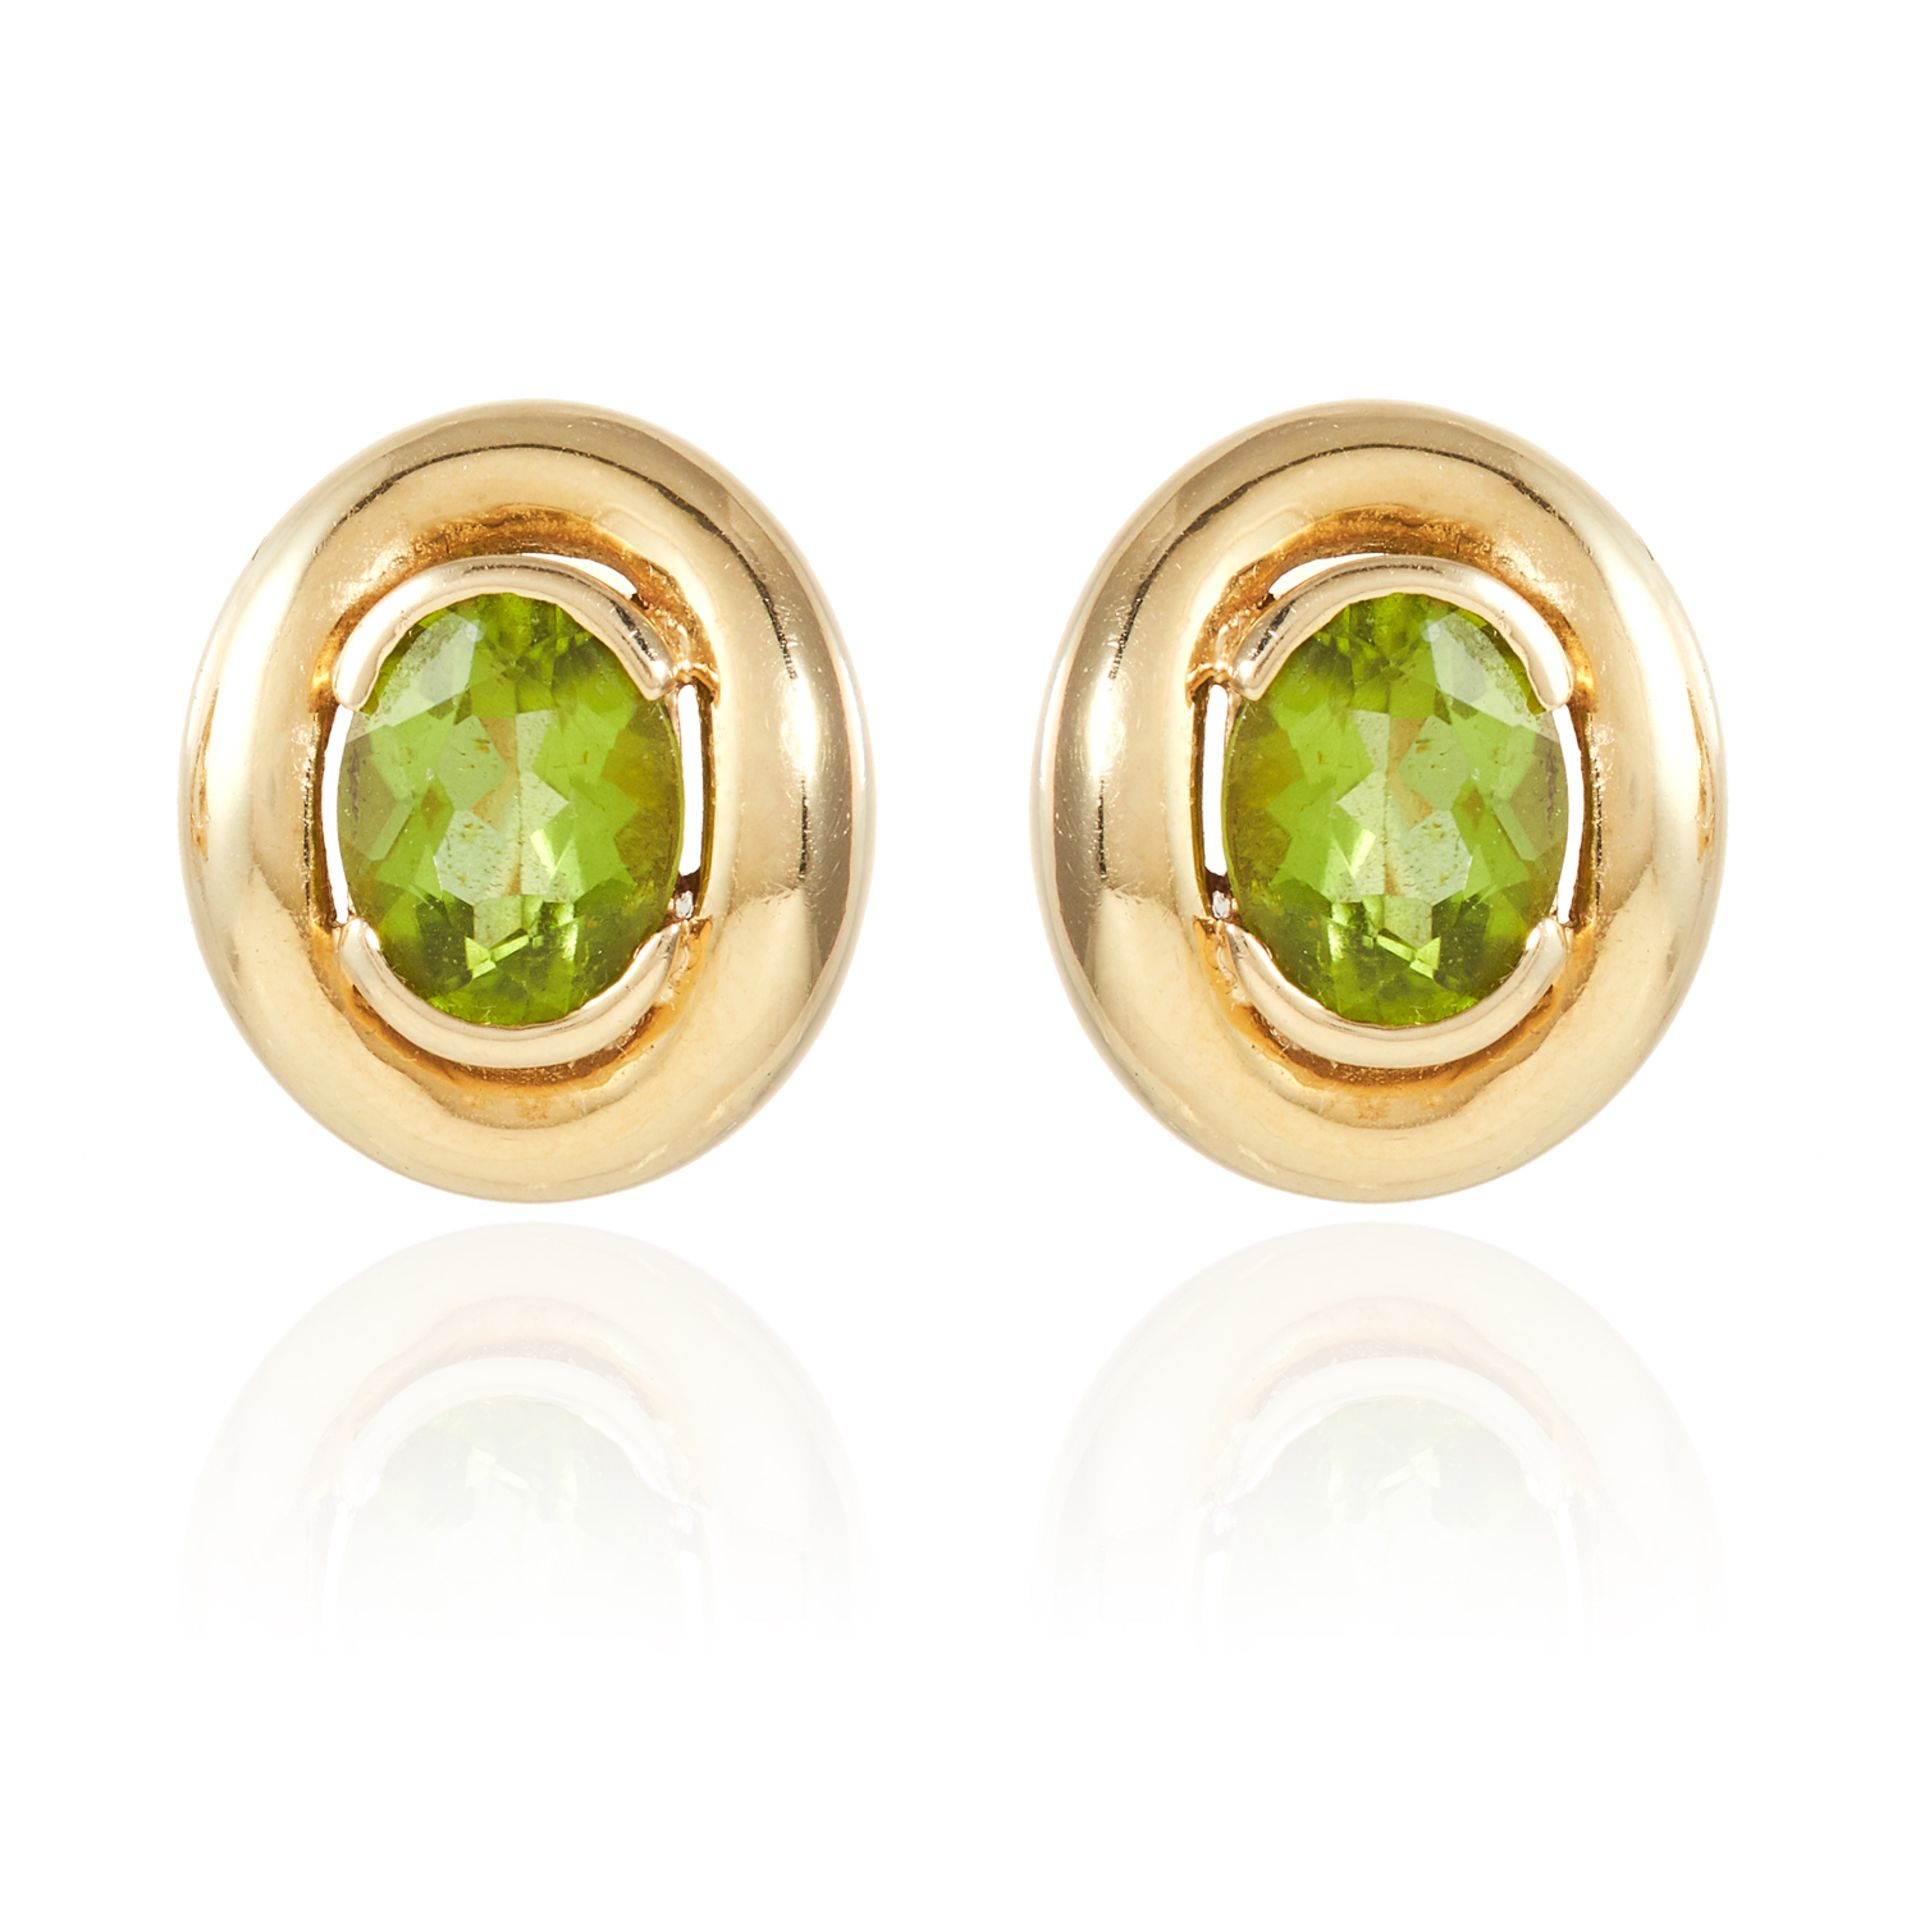 A PAIR OF PERIDOT EARRINGS in 18ct yellow gold, each set with an oval cut peridot totalling